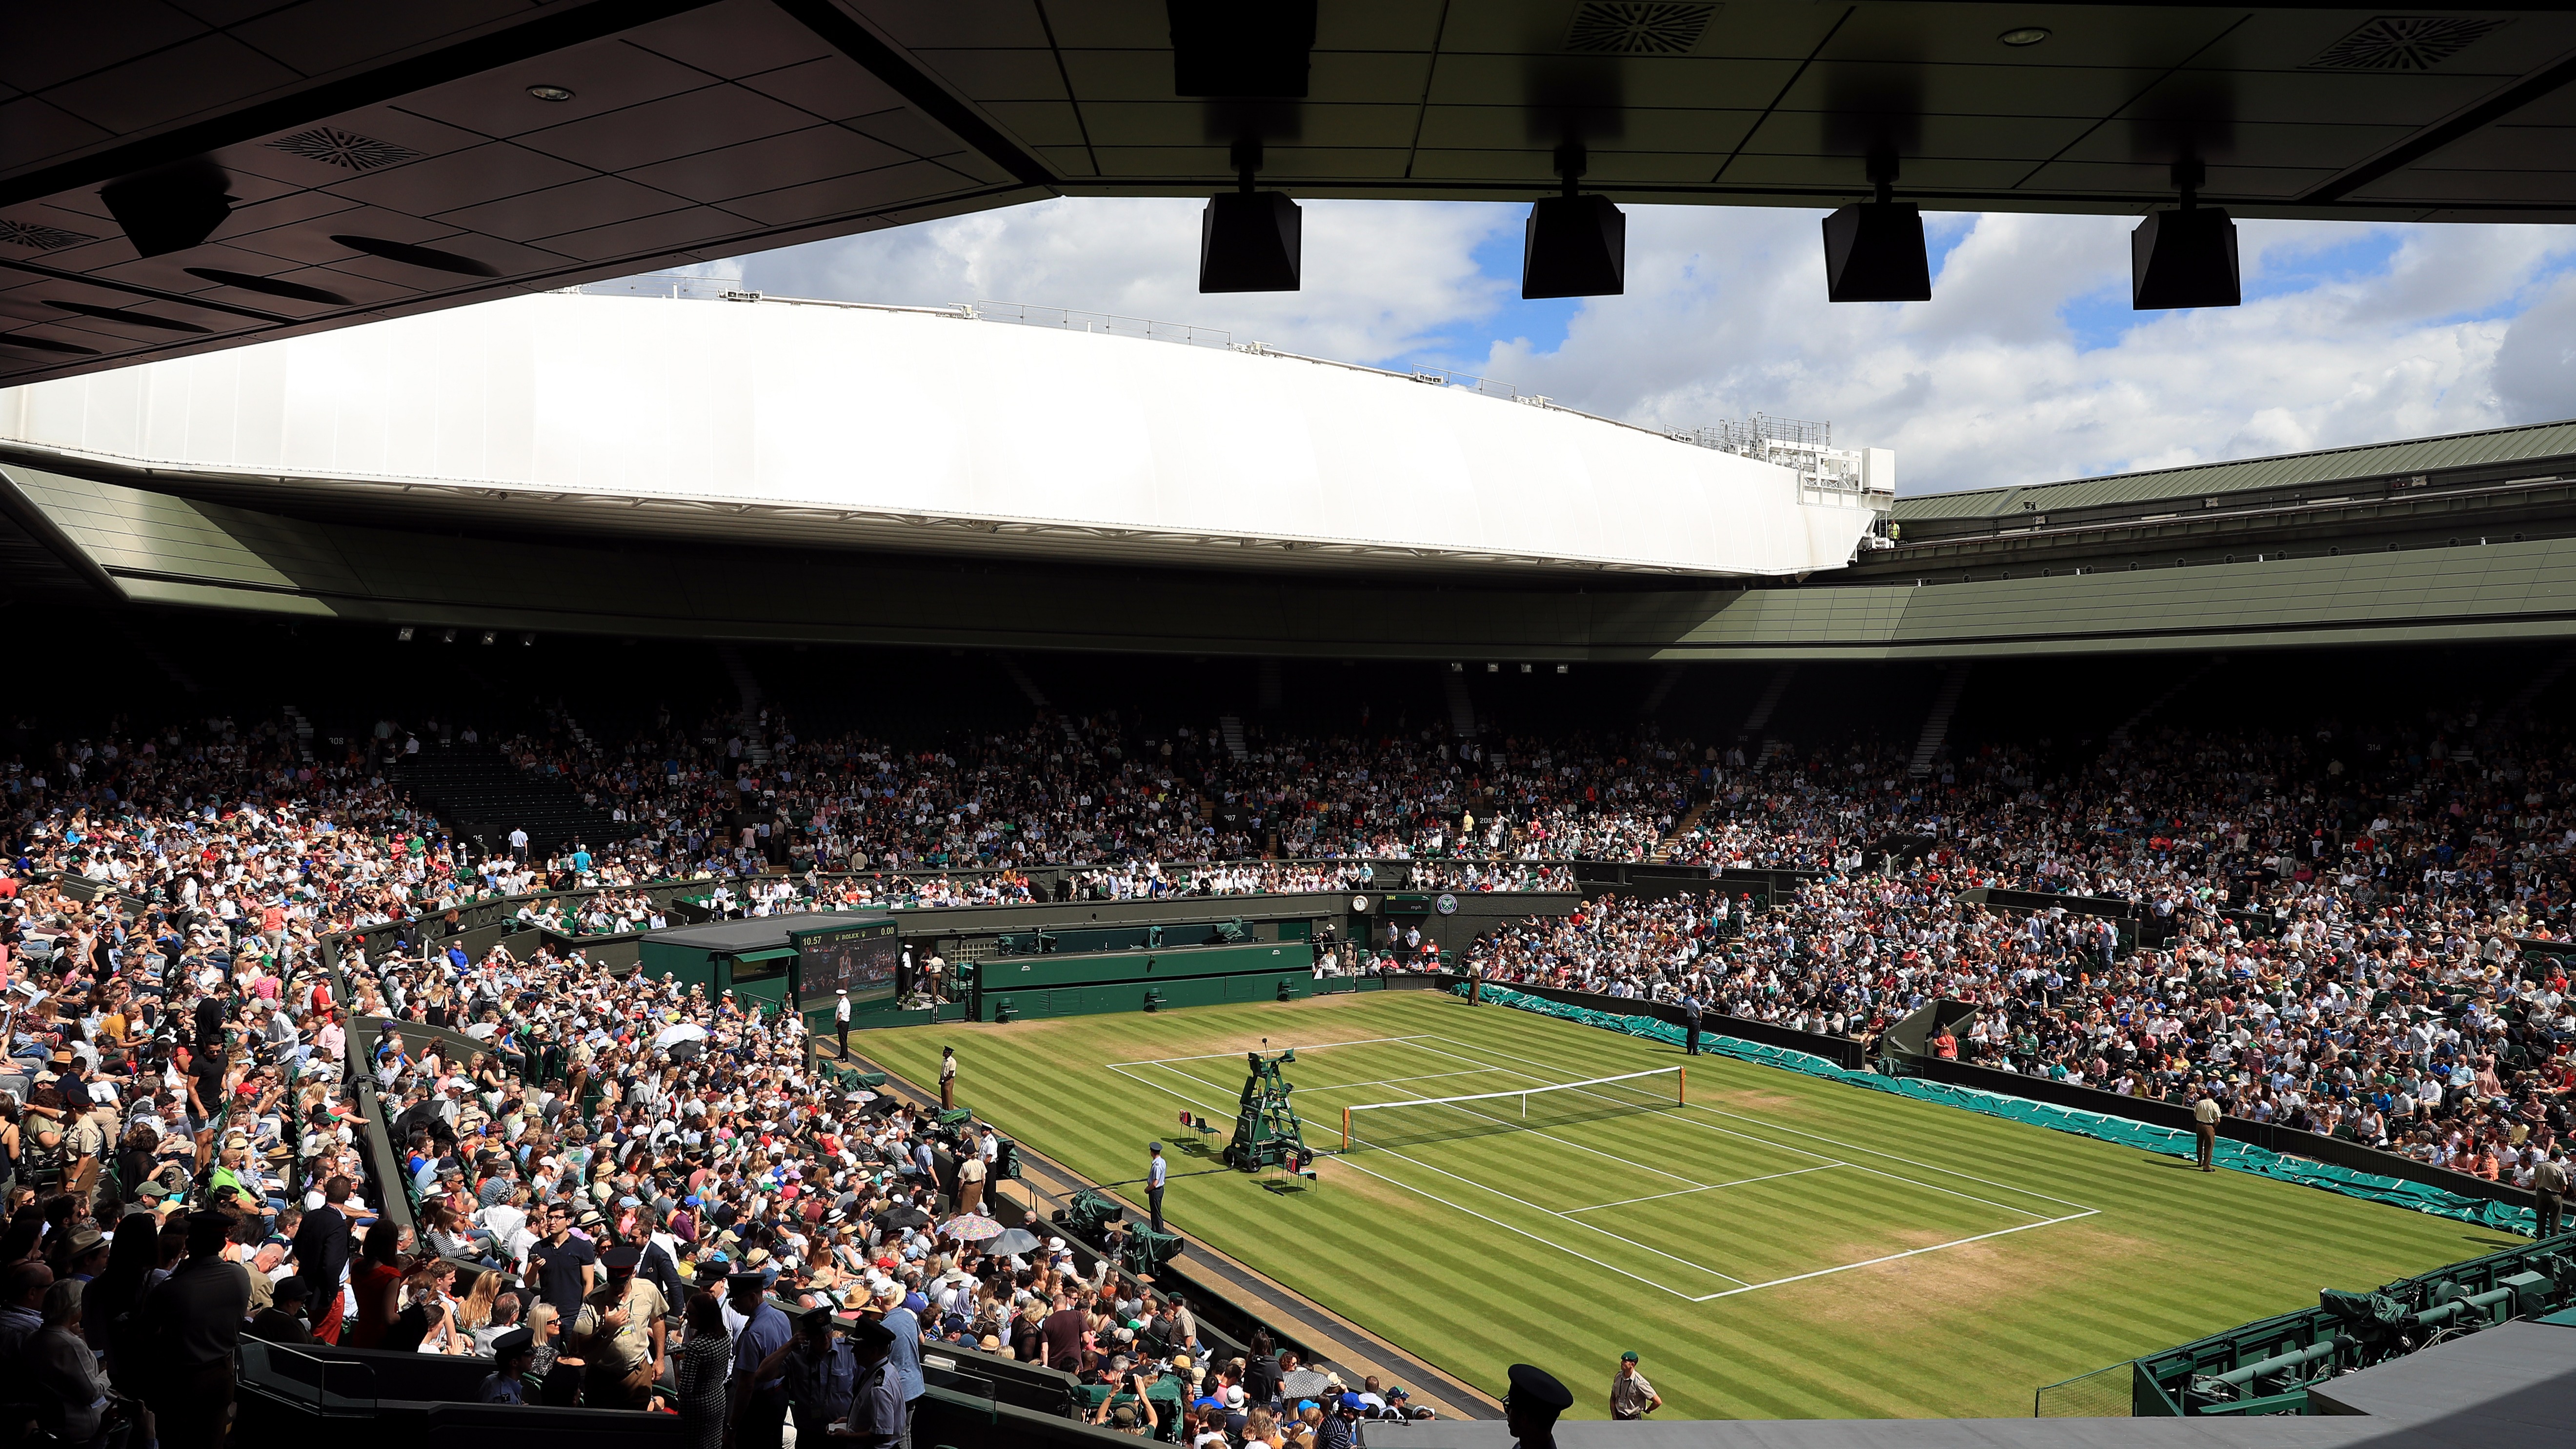 Wimbledon capacity 2021: How many people are in the crowd this year